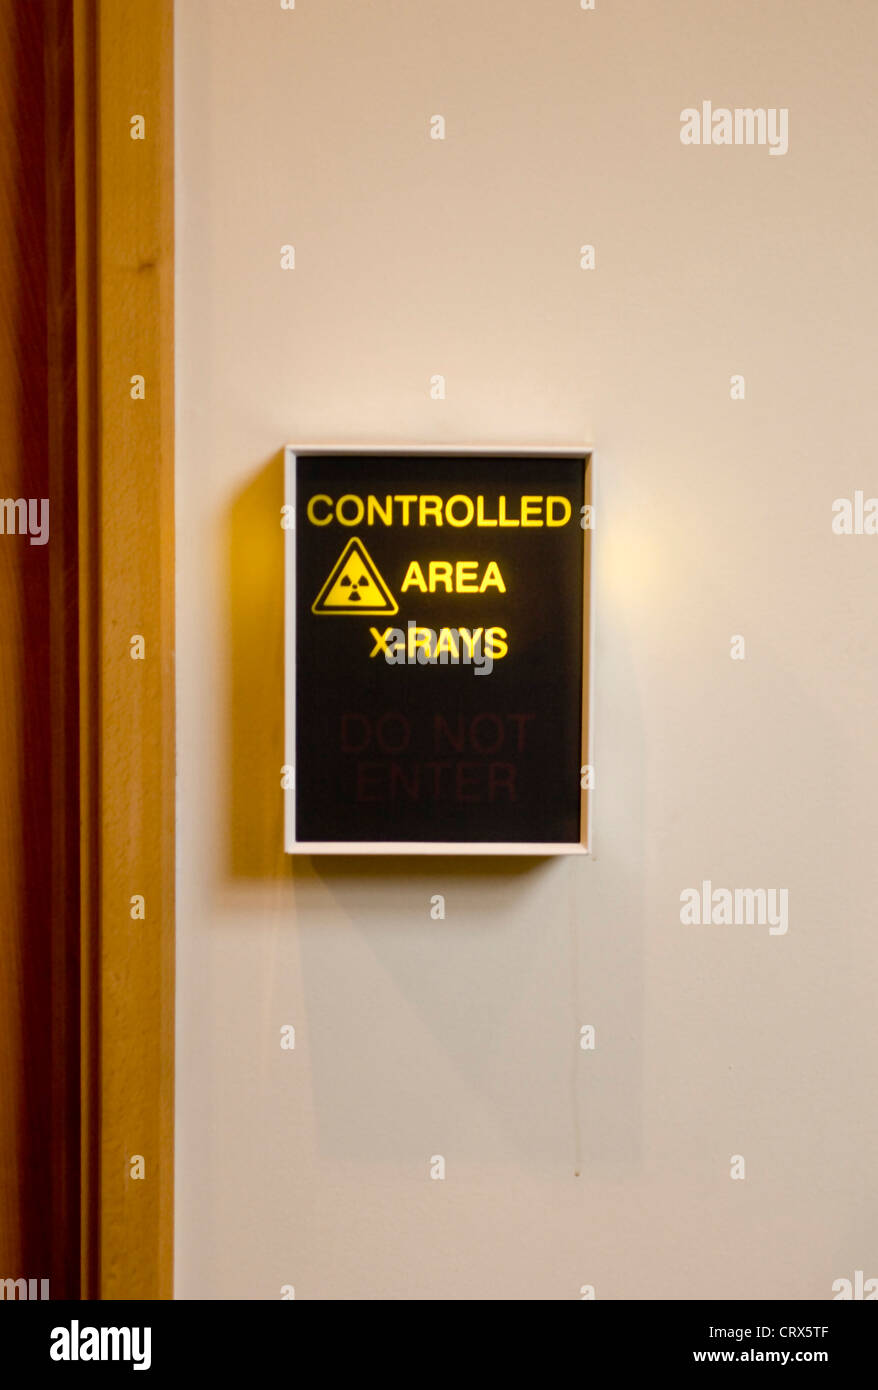 An illuminated hospital sign outside a controlled area for x-rays Stock Photo